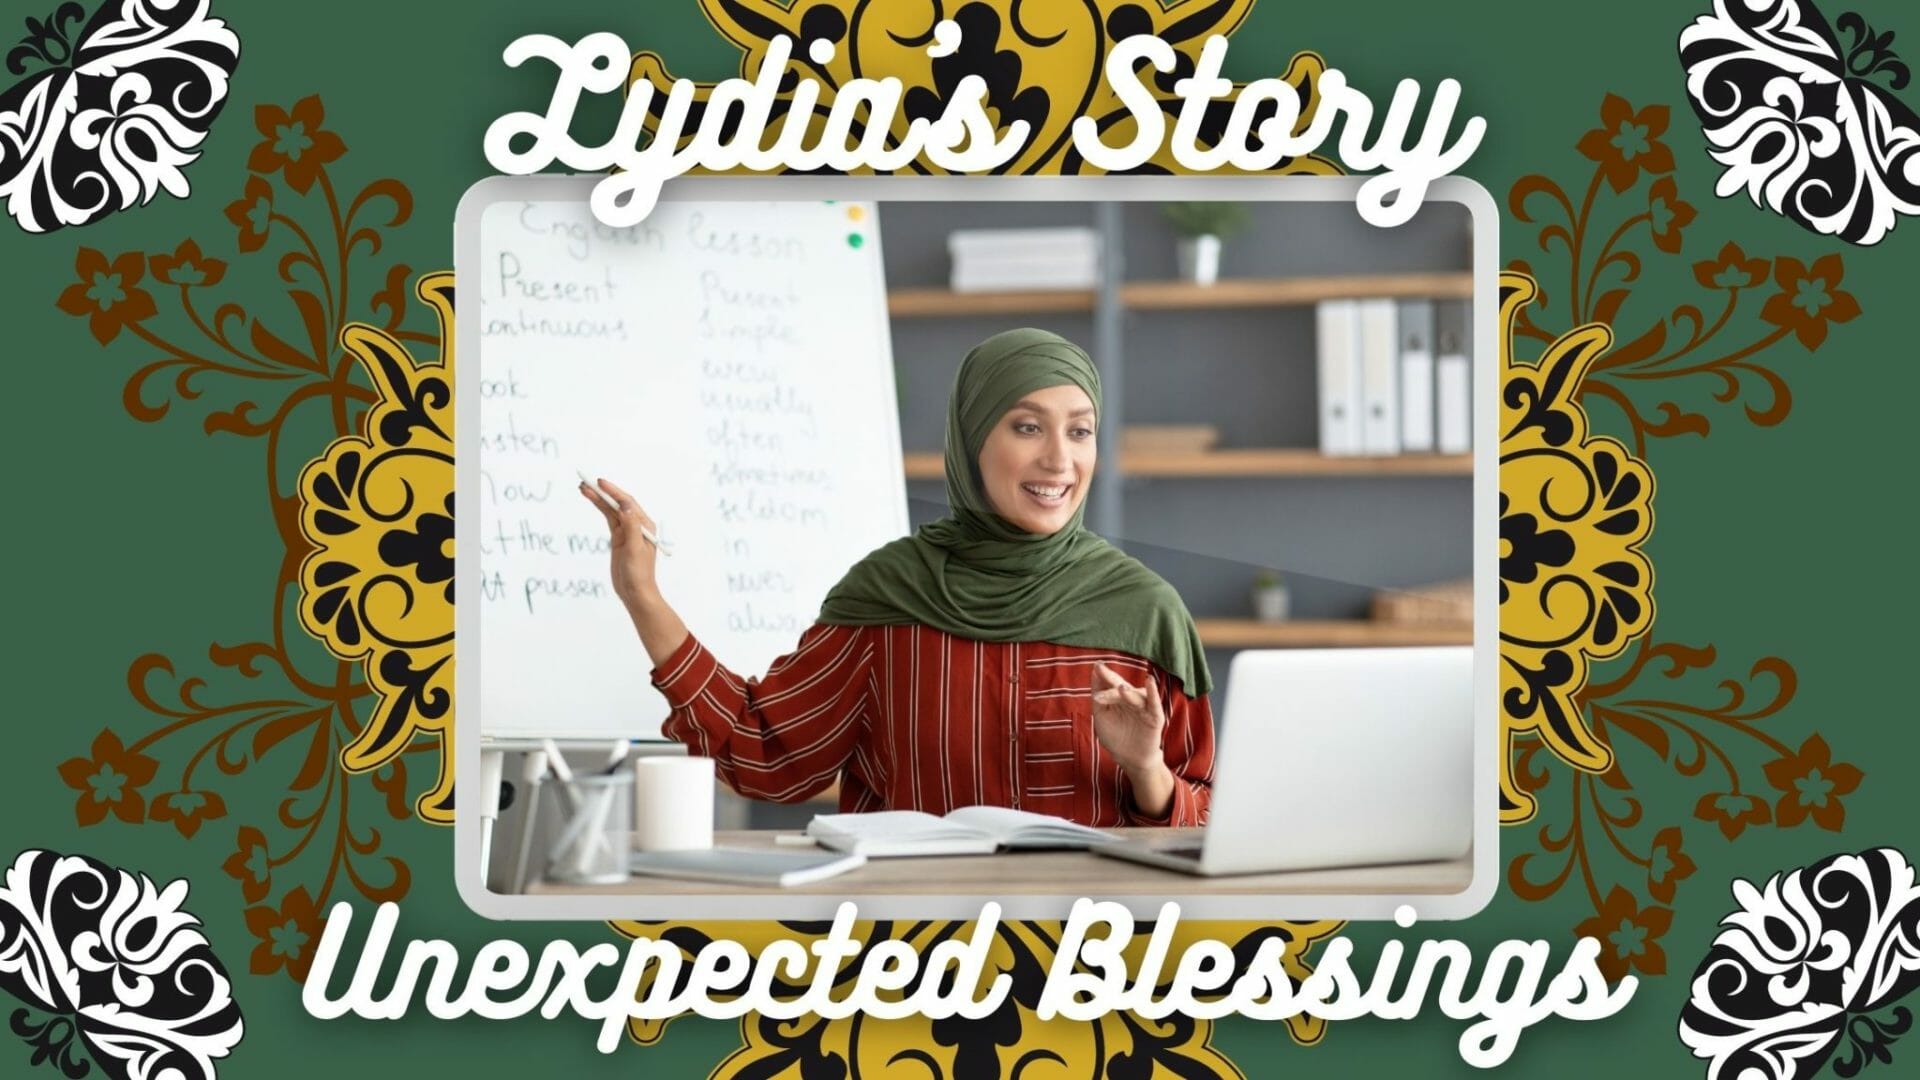 Lydia's Story - Unexpected Blessings